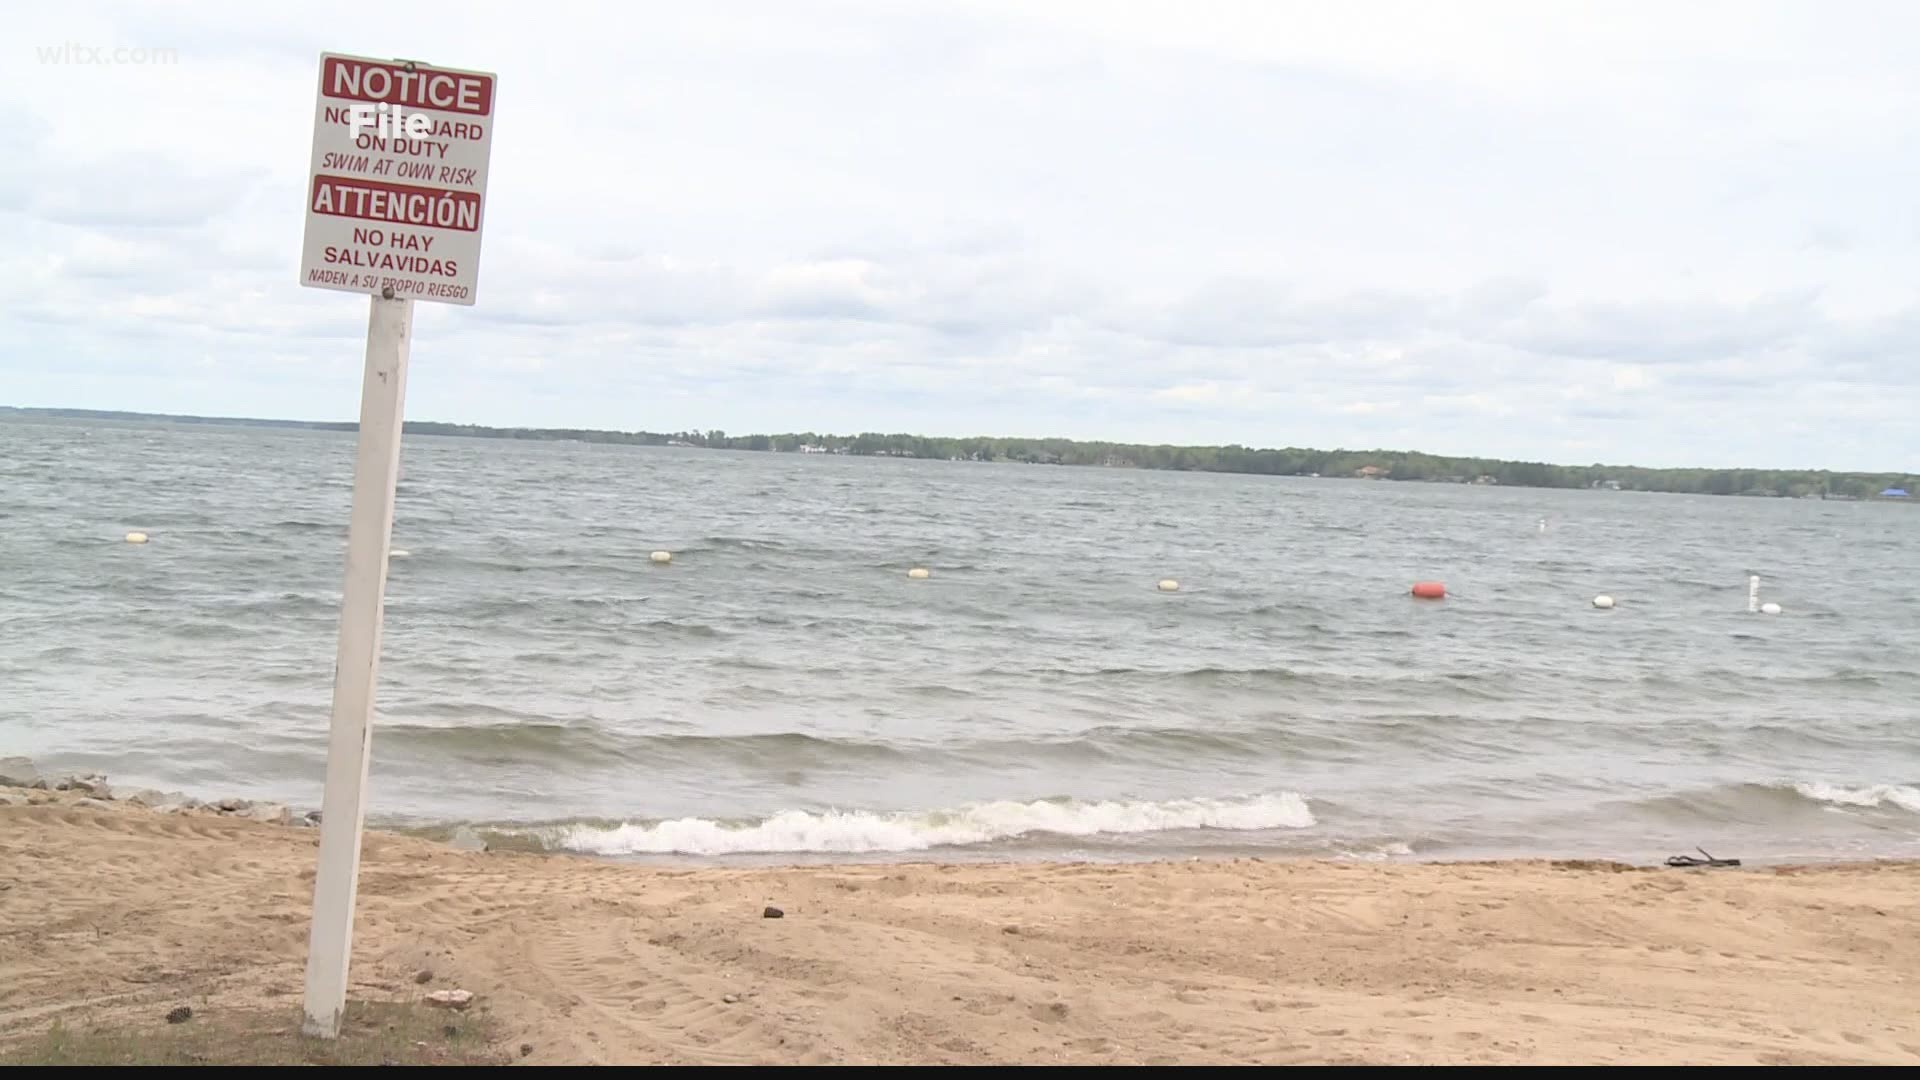 According to officials, the beach will remain closed at this time because of safety guidelines.